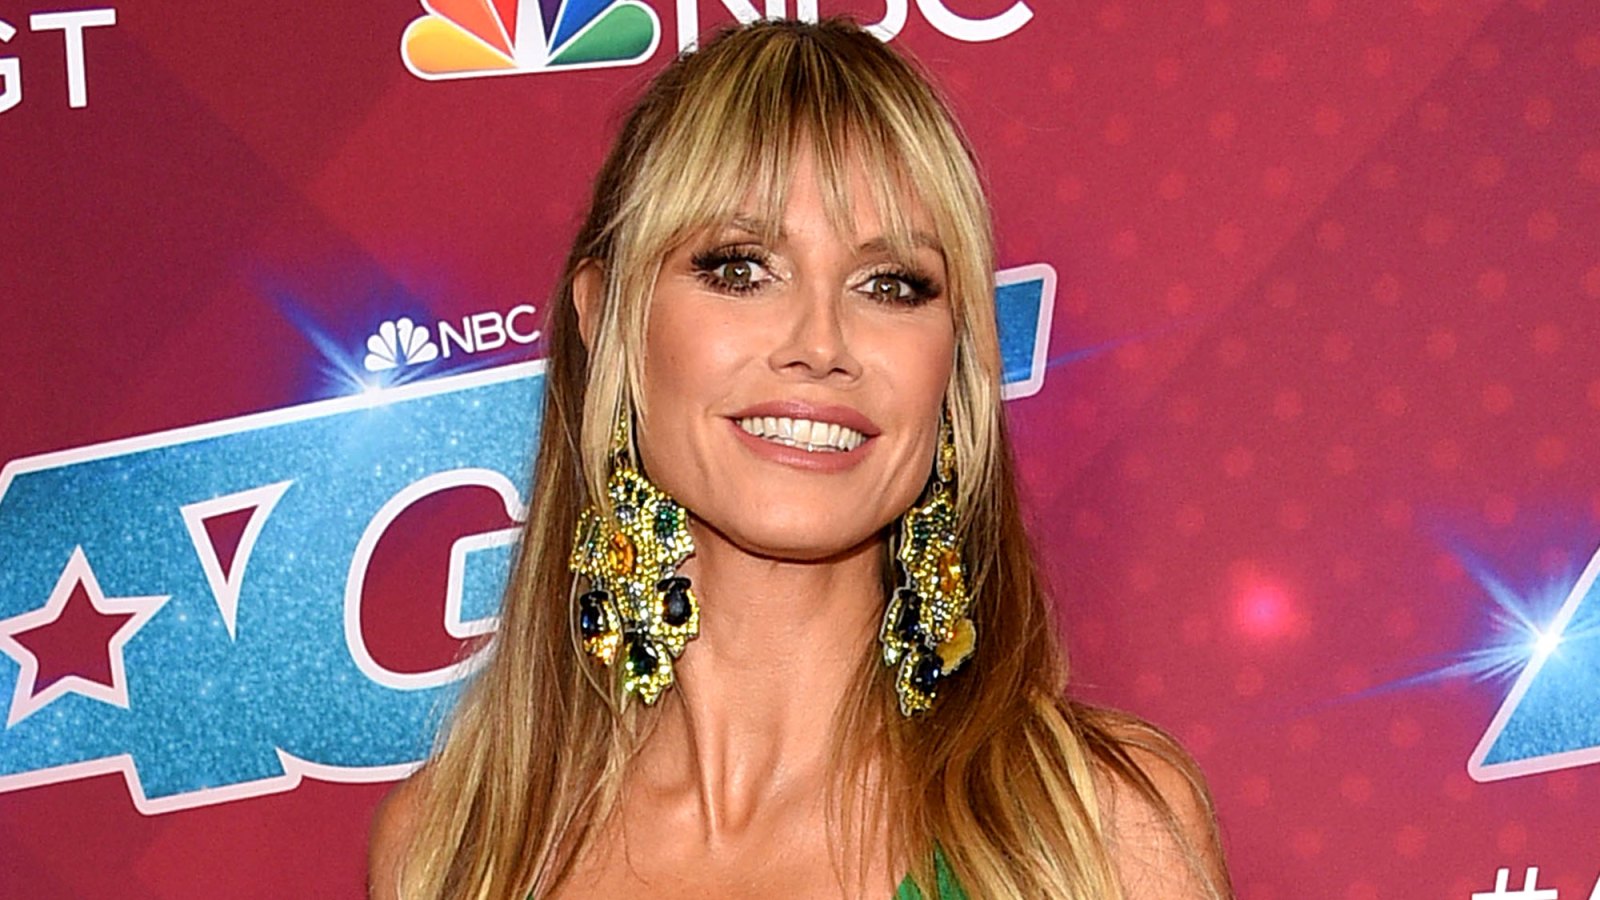 Heidi Klum Shares NSFW Story of Worst Date Ever: It Was 'Very Memorable